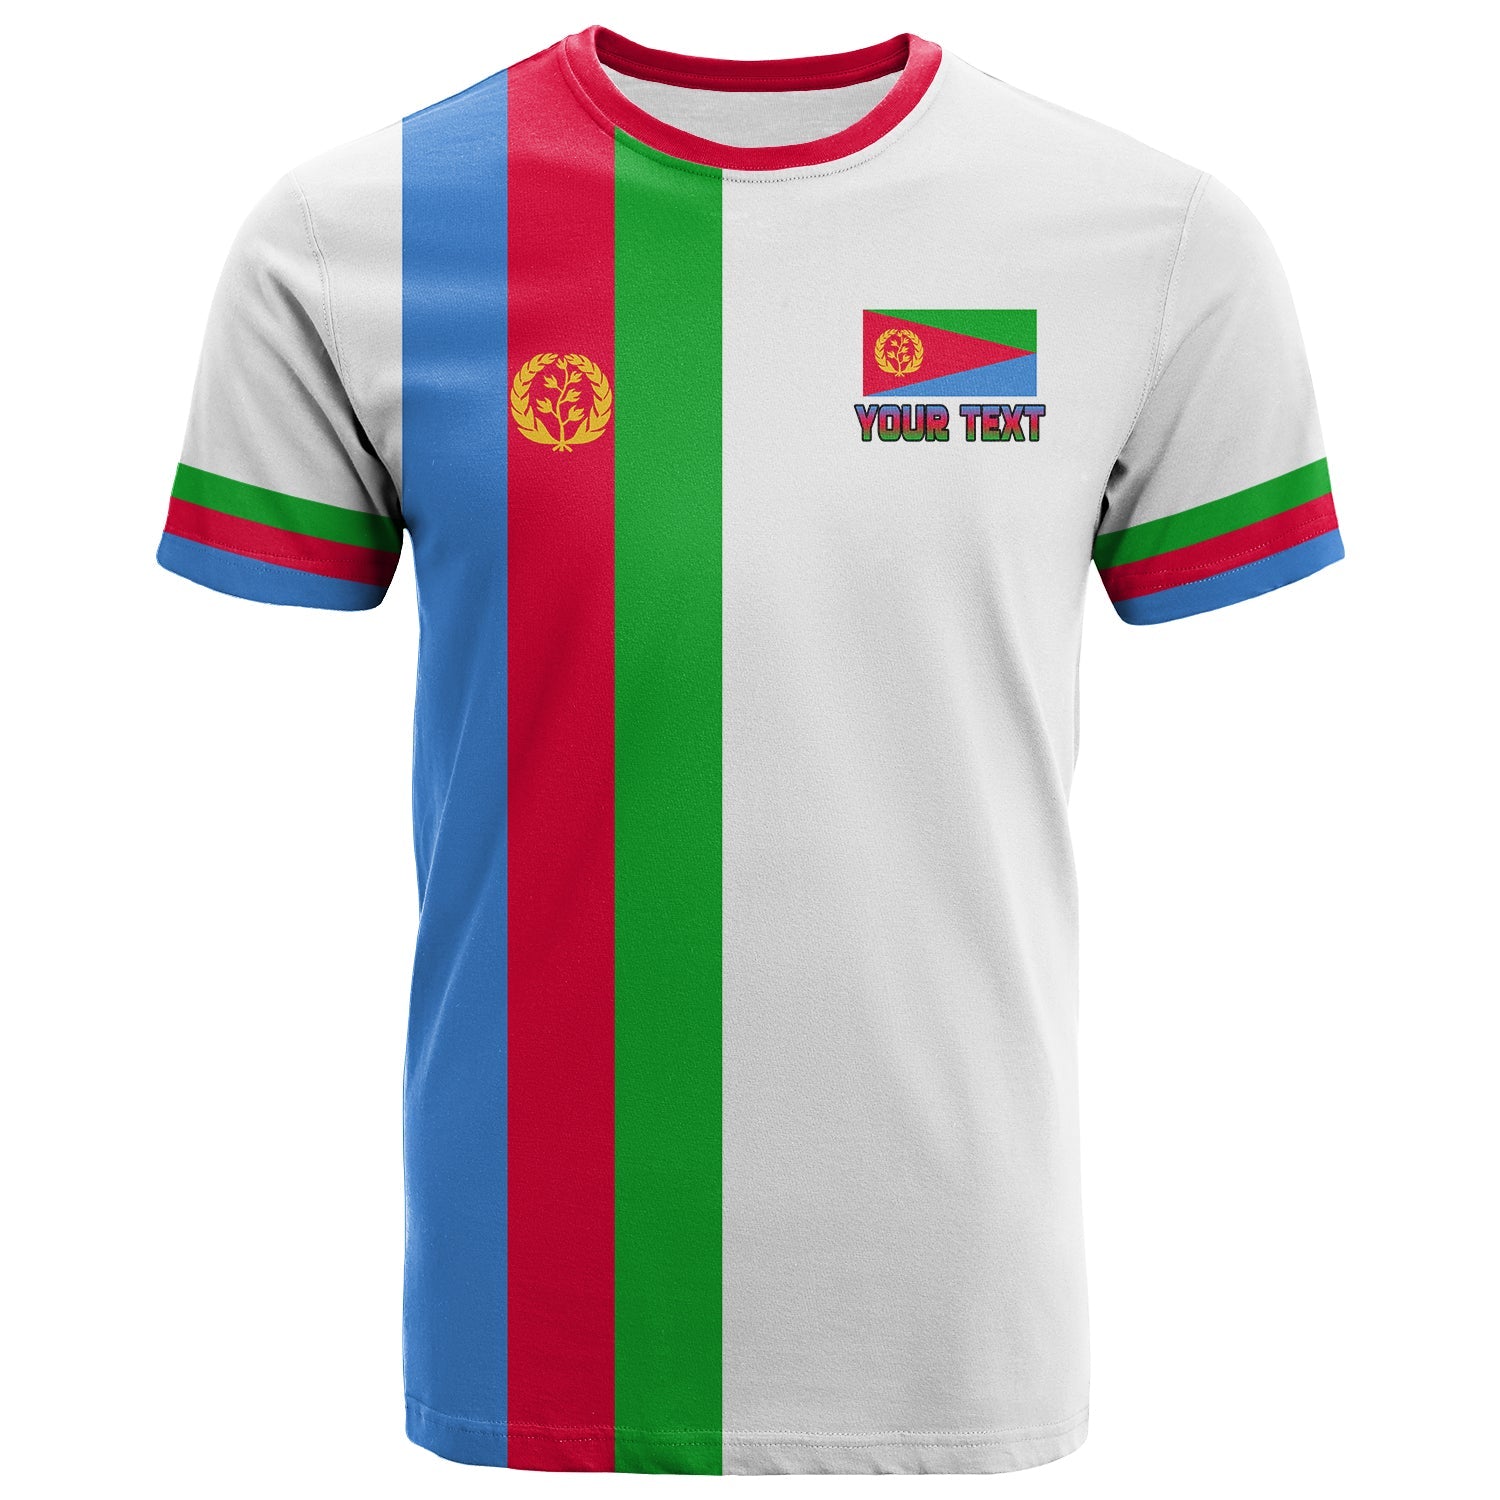 custom-text-and-number-eritrea-t-shirt-striped-sporty-style-02